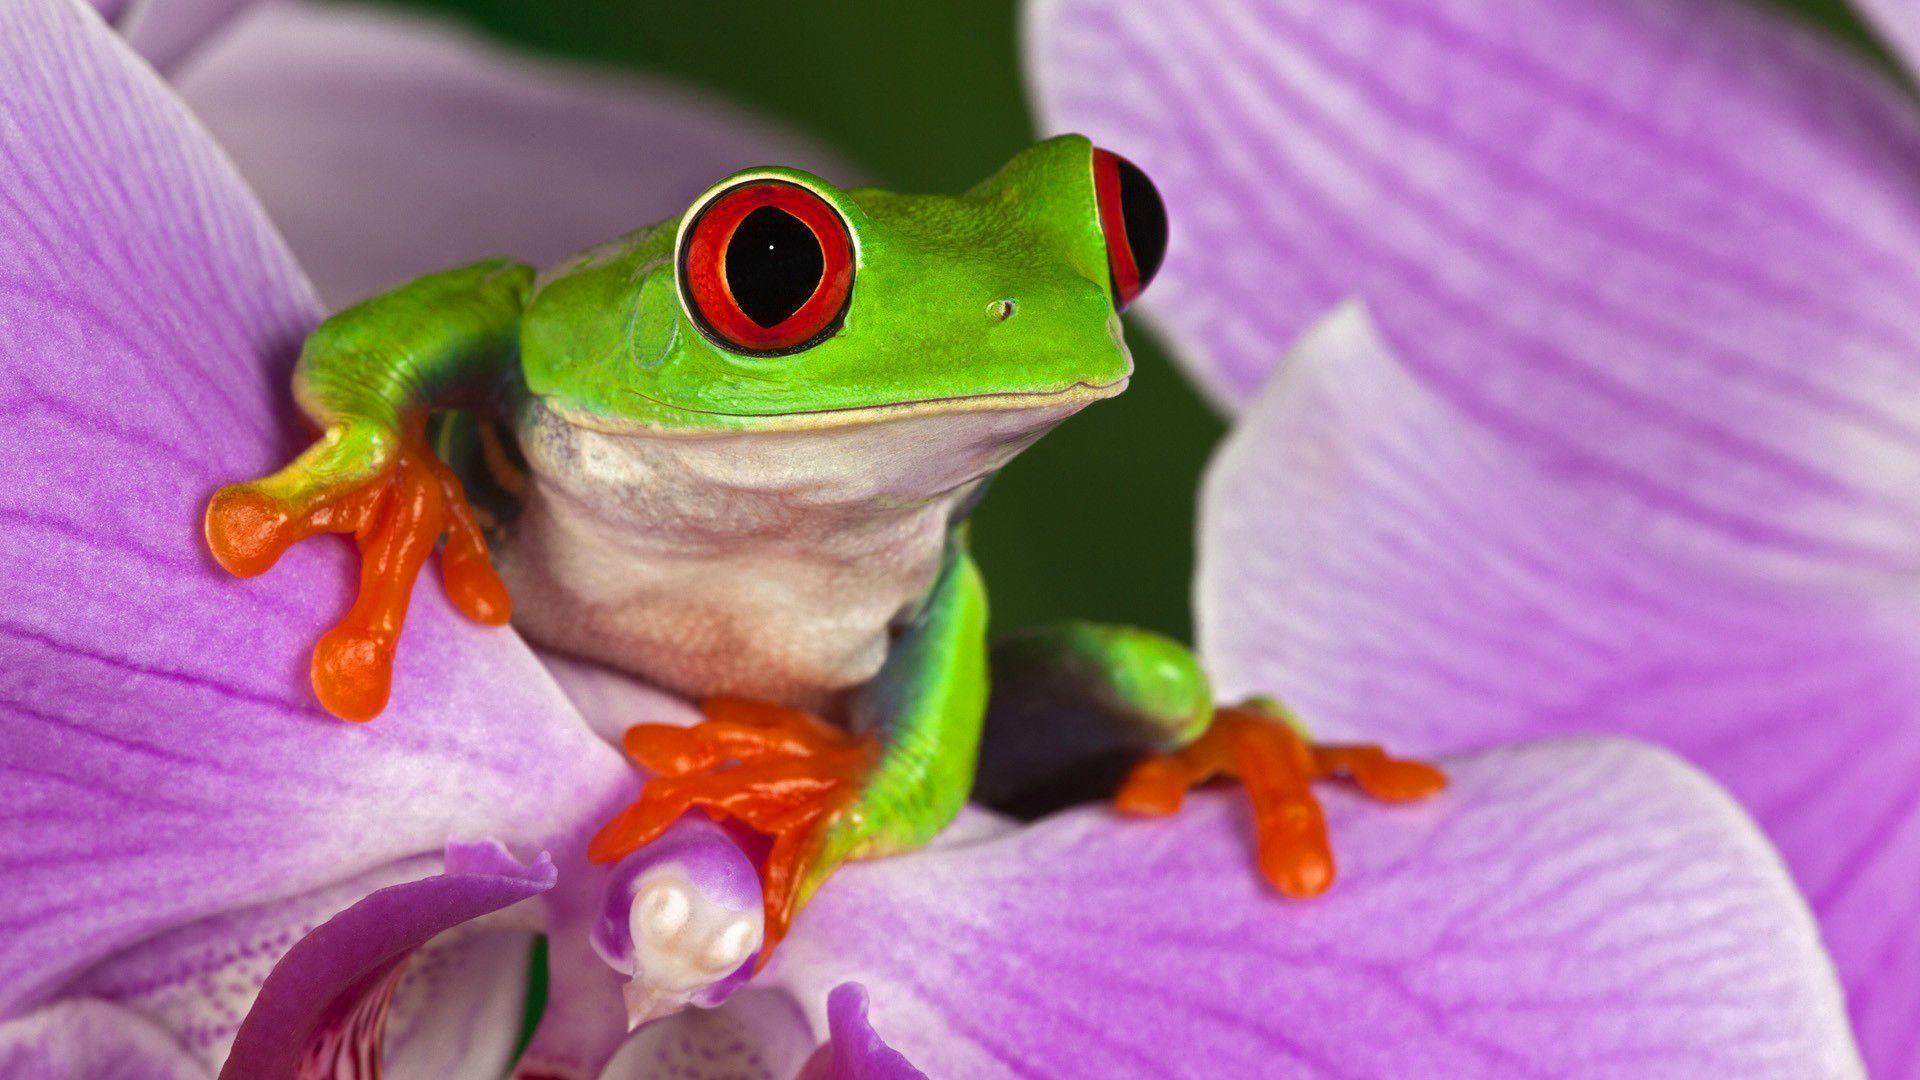 Red Eyed Tree Frog on Purple Flower. Macro Photo and Wallpaper